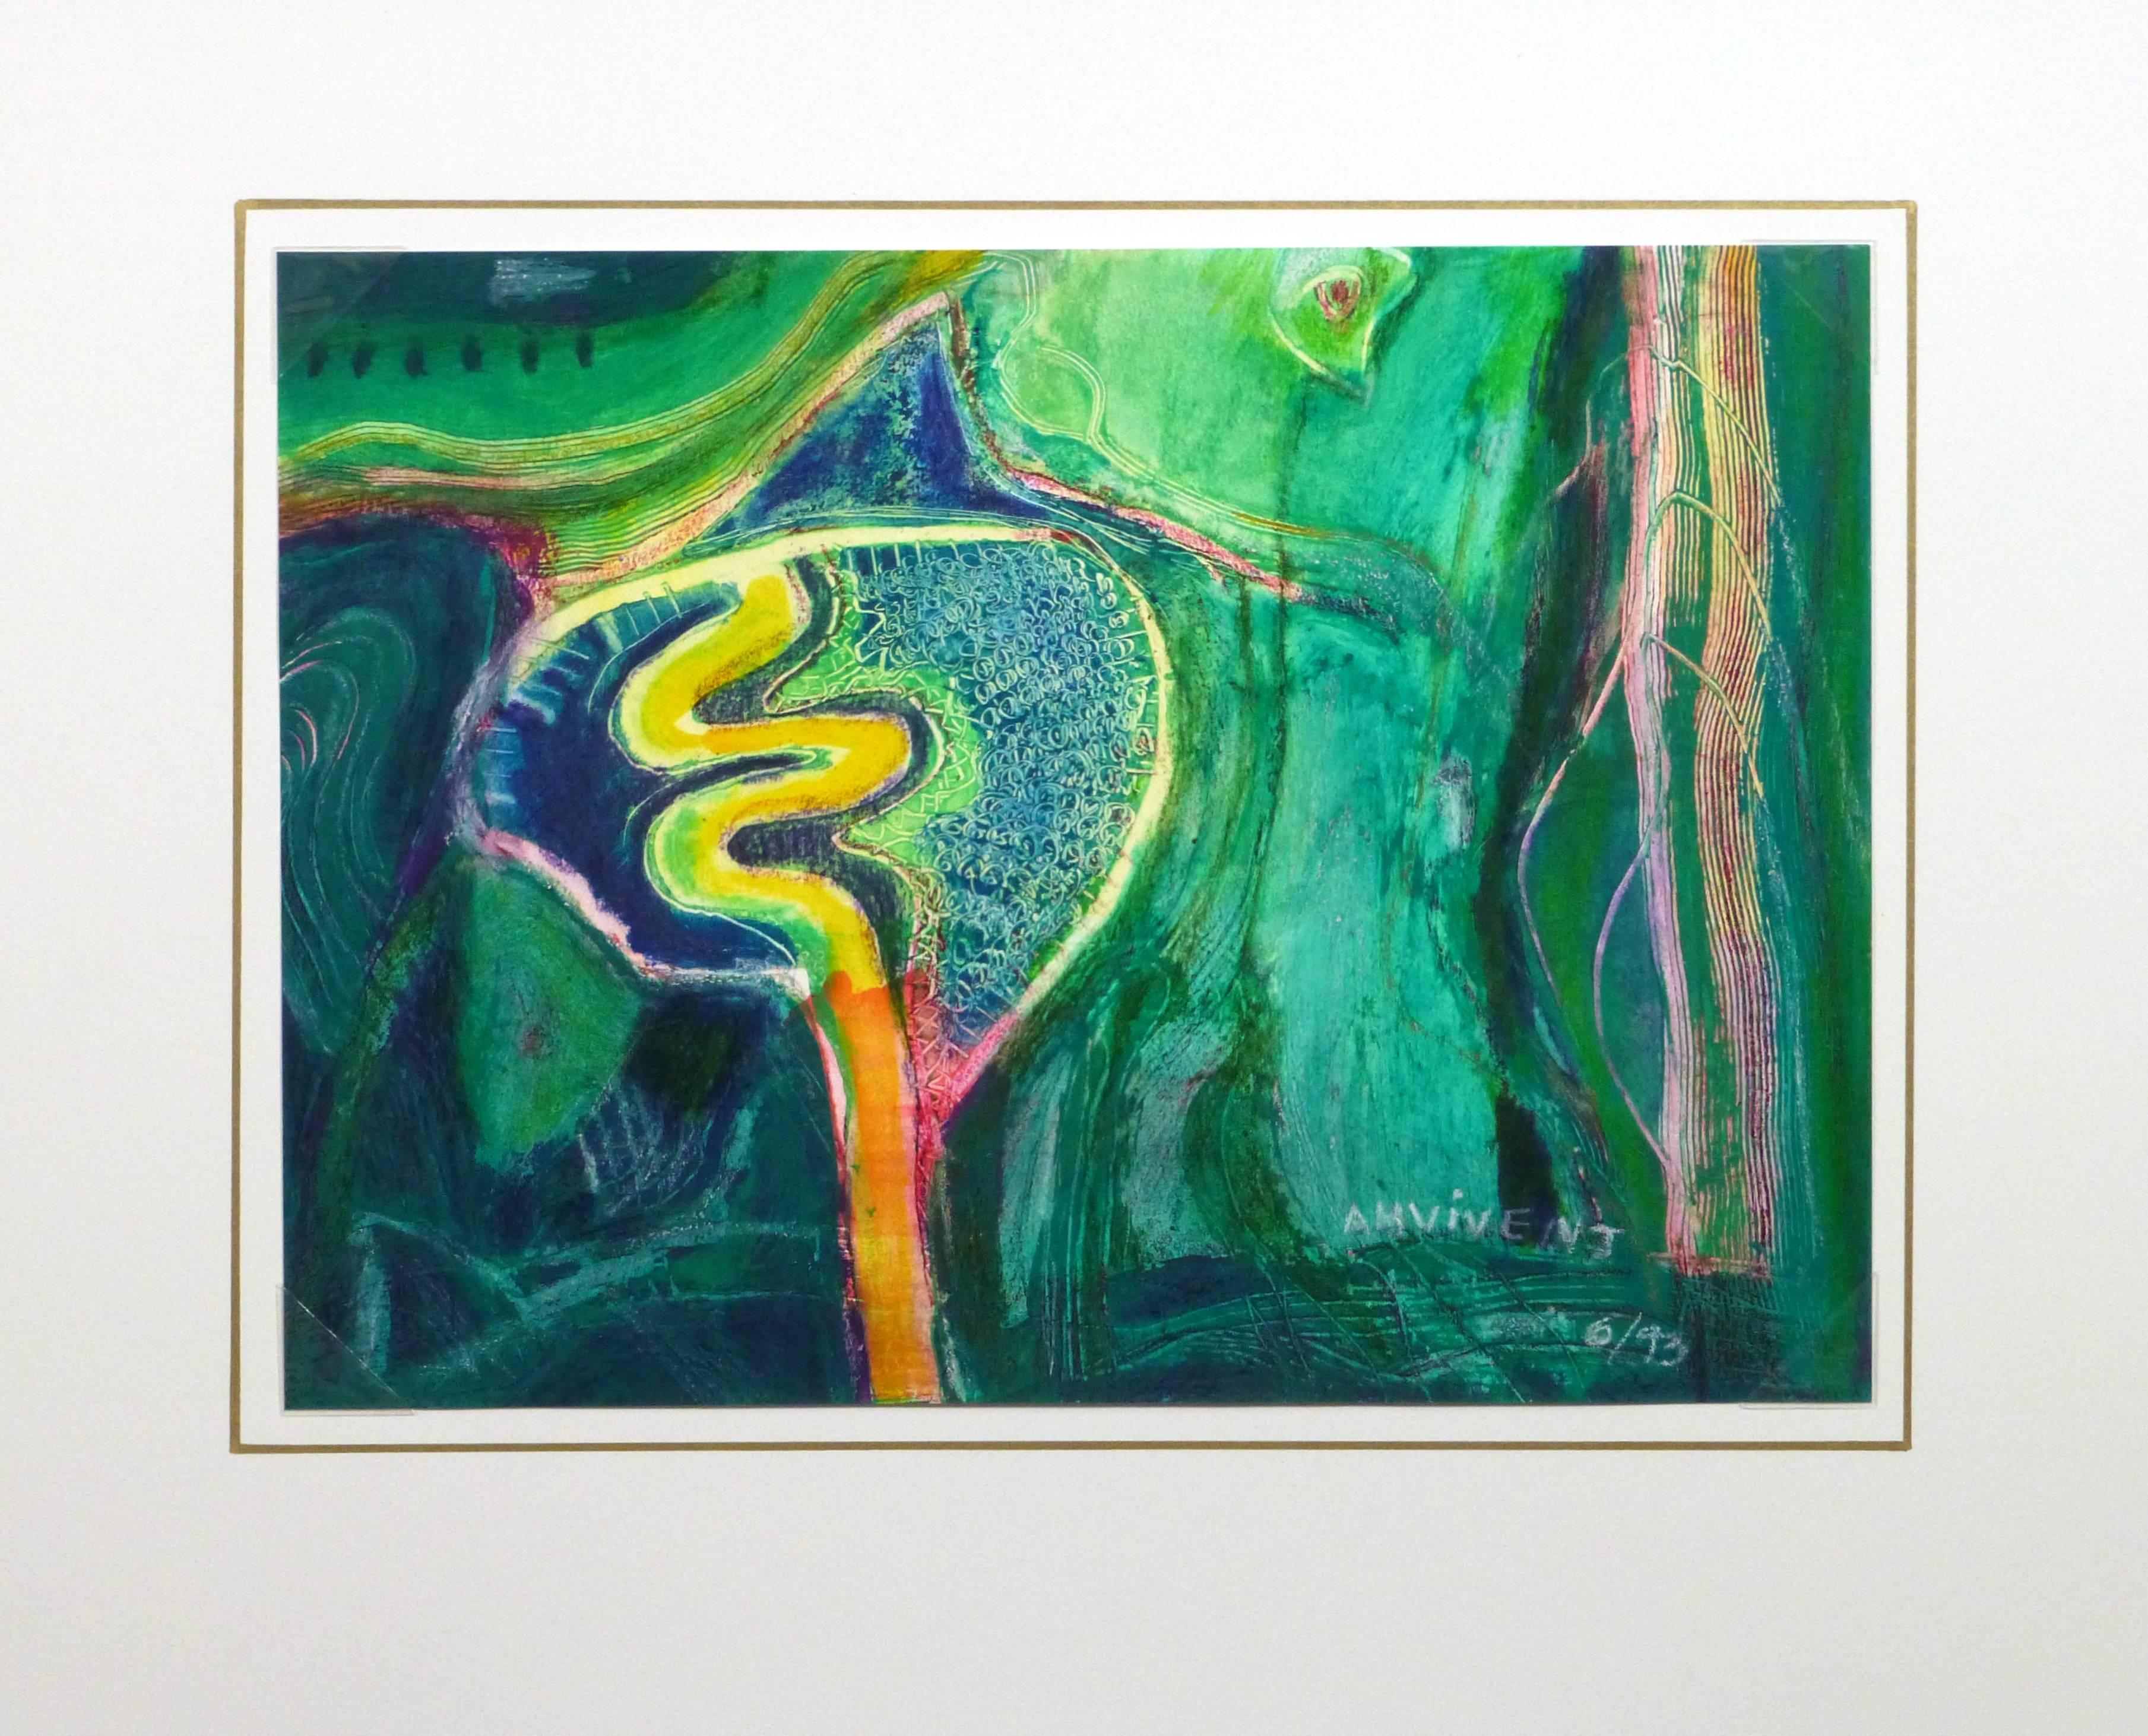 Abstract of shapes and lines etched into green acrylic and highlighted with hues of yellow, pink and orange by A. Vivent, 1993. Signed and date lower right.

Original artwork on paper displayed on a white mat with a gold border. Mat fits a